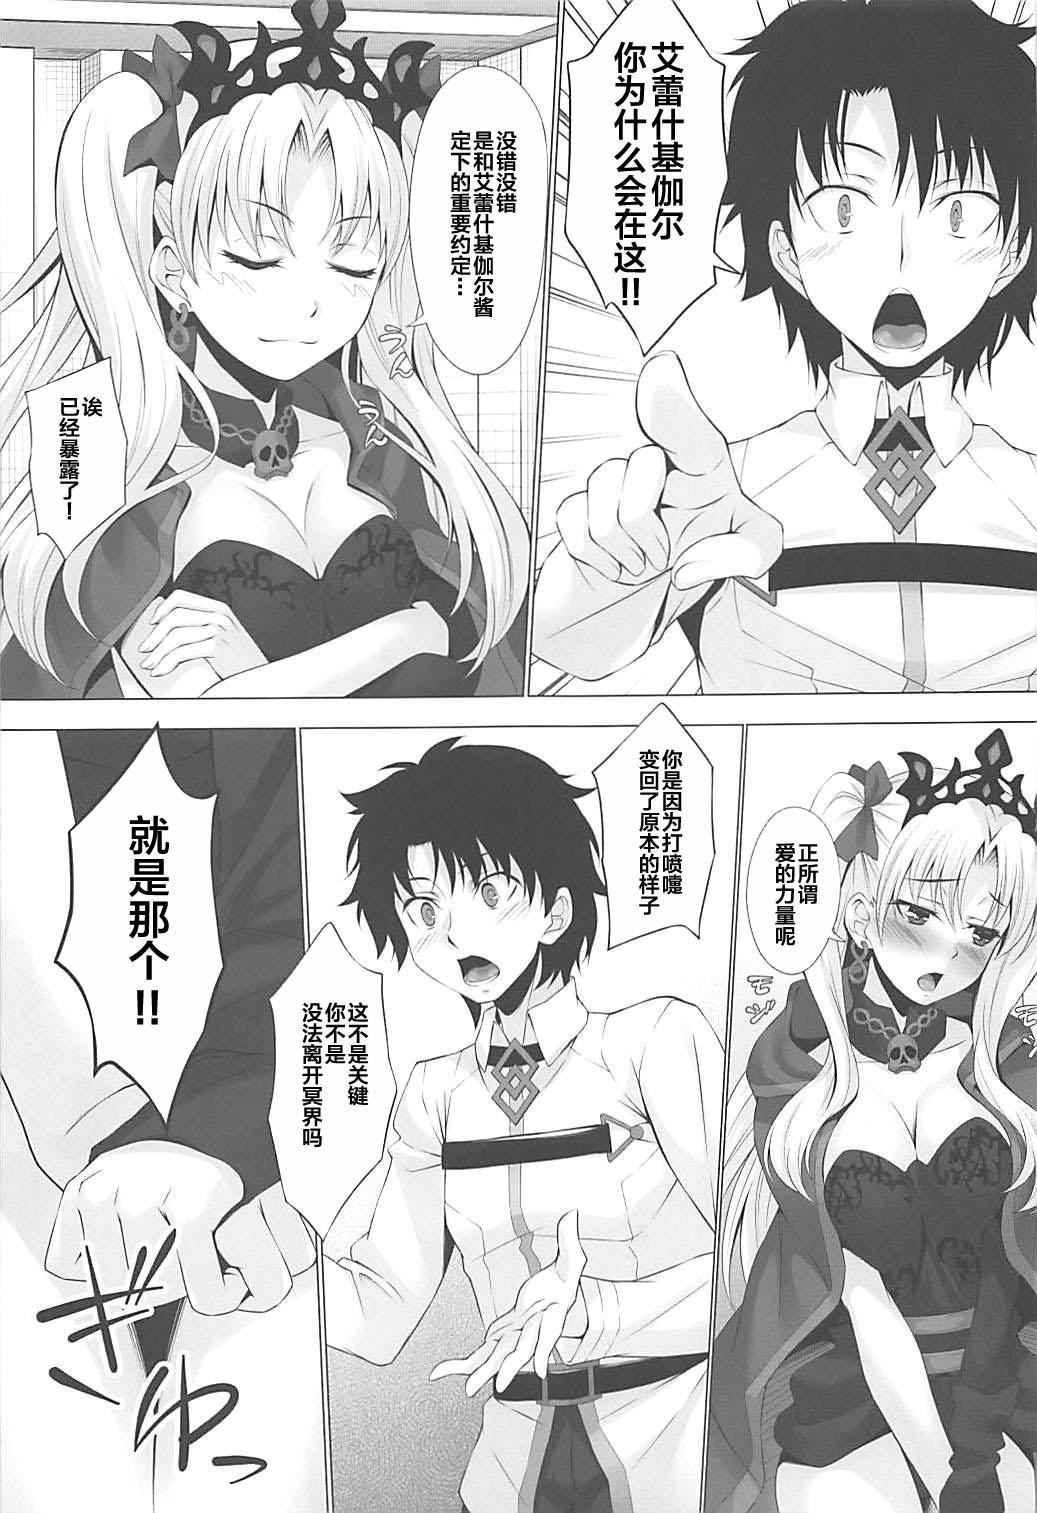 Blond HELP ME... - Fate grand order Milf Cougar - Page 7